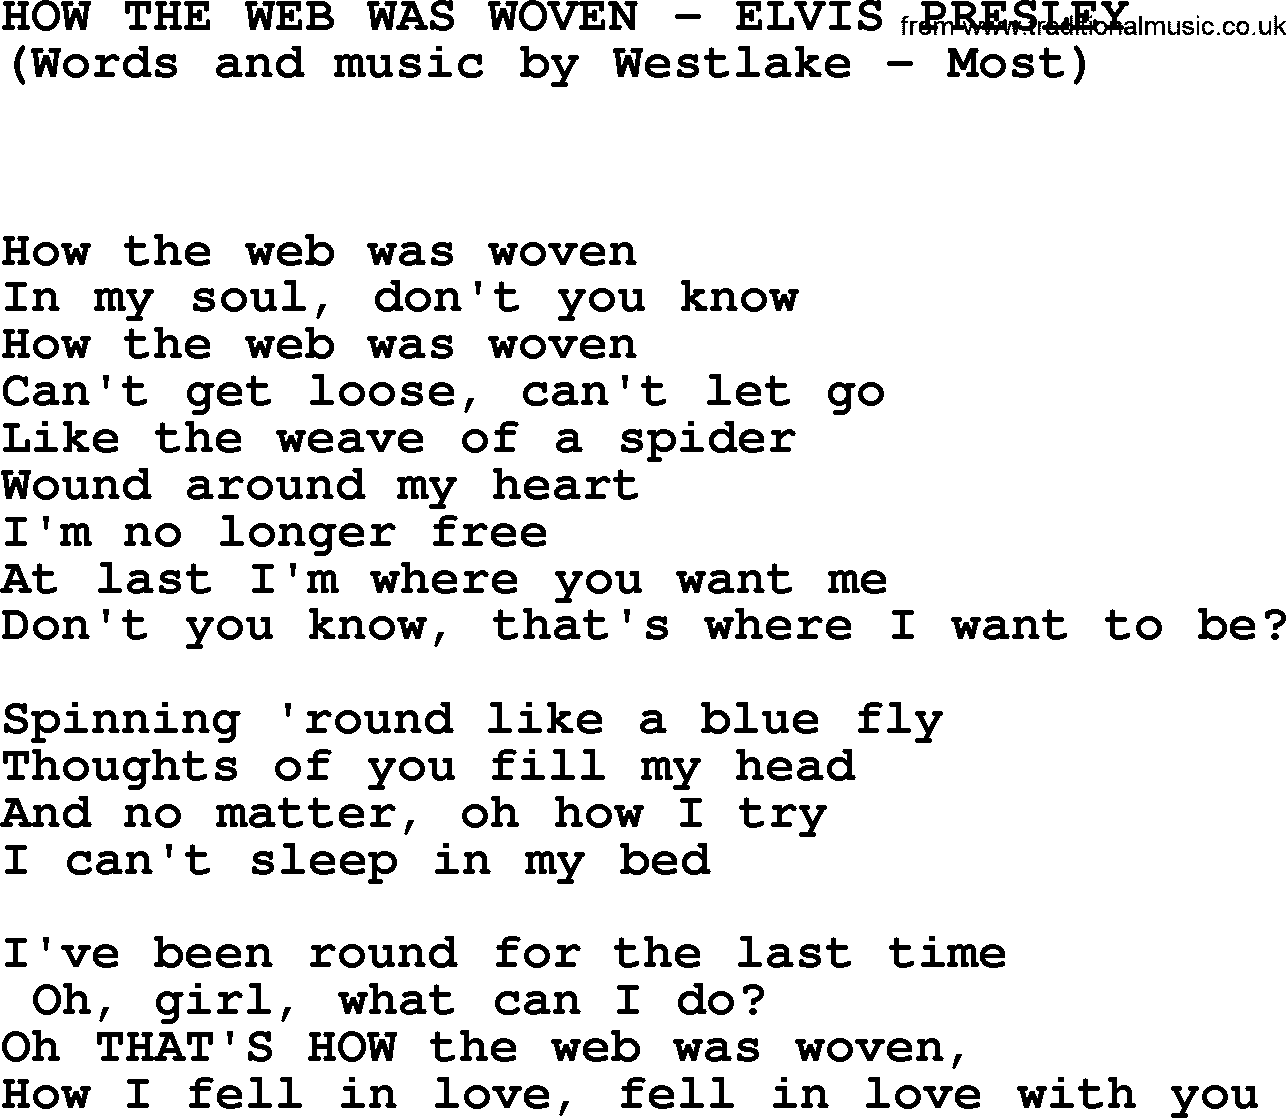 Elvis Presley song: How The Web Was Woven lyrics